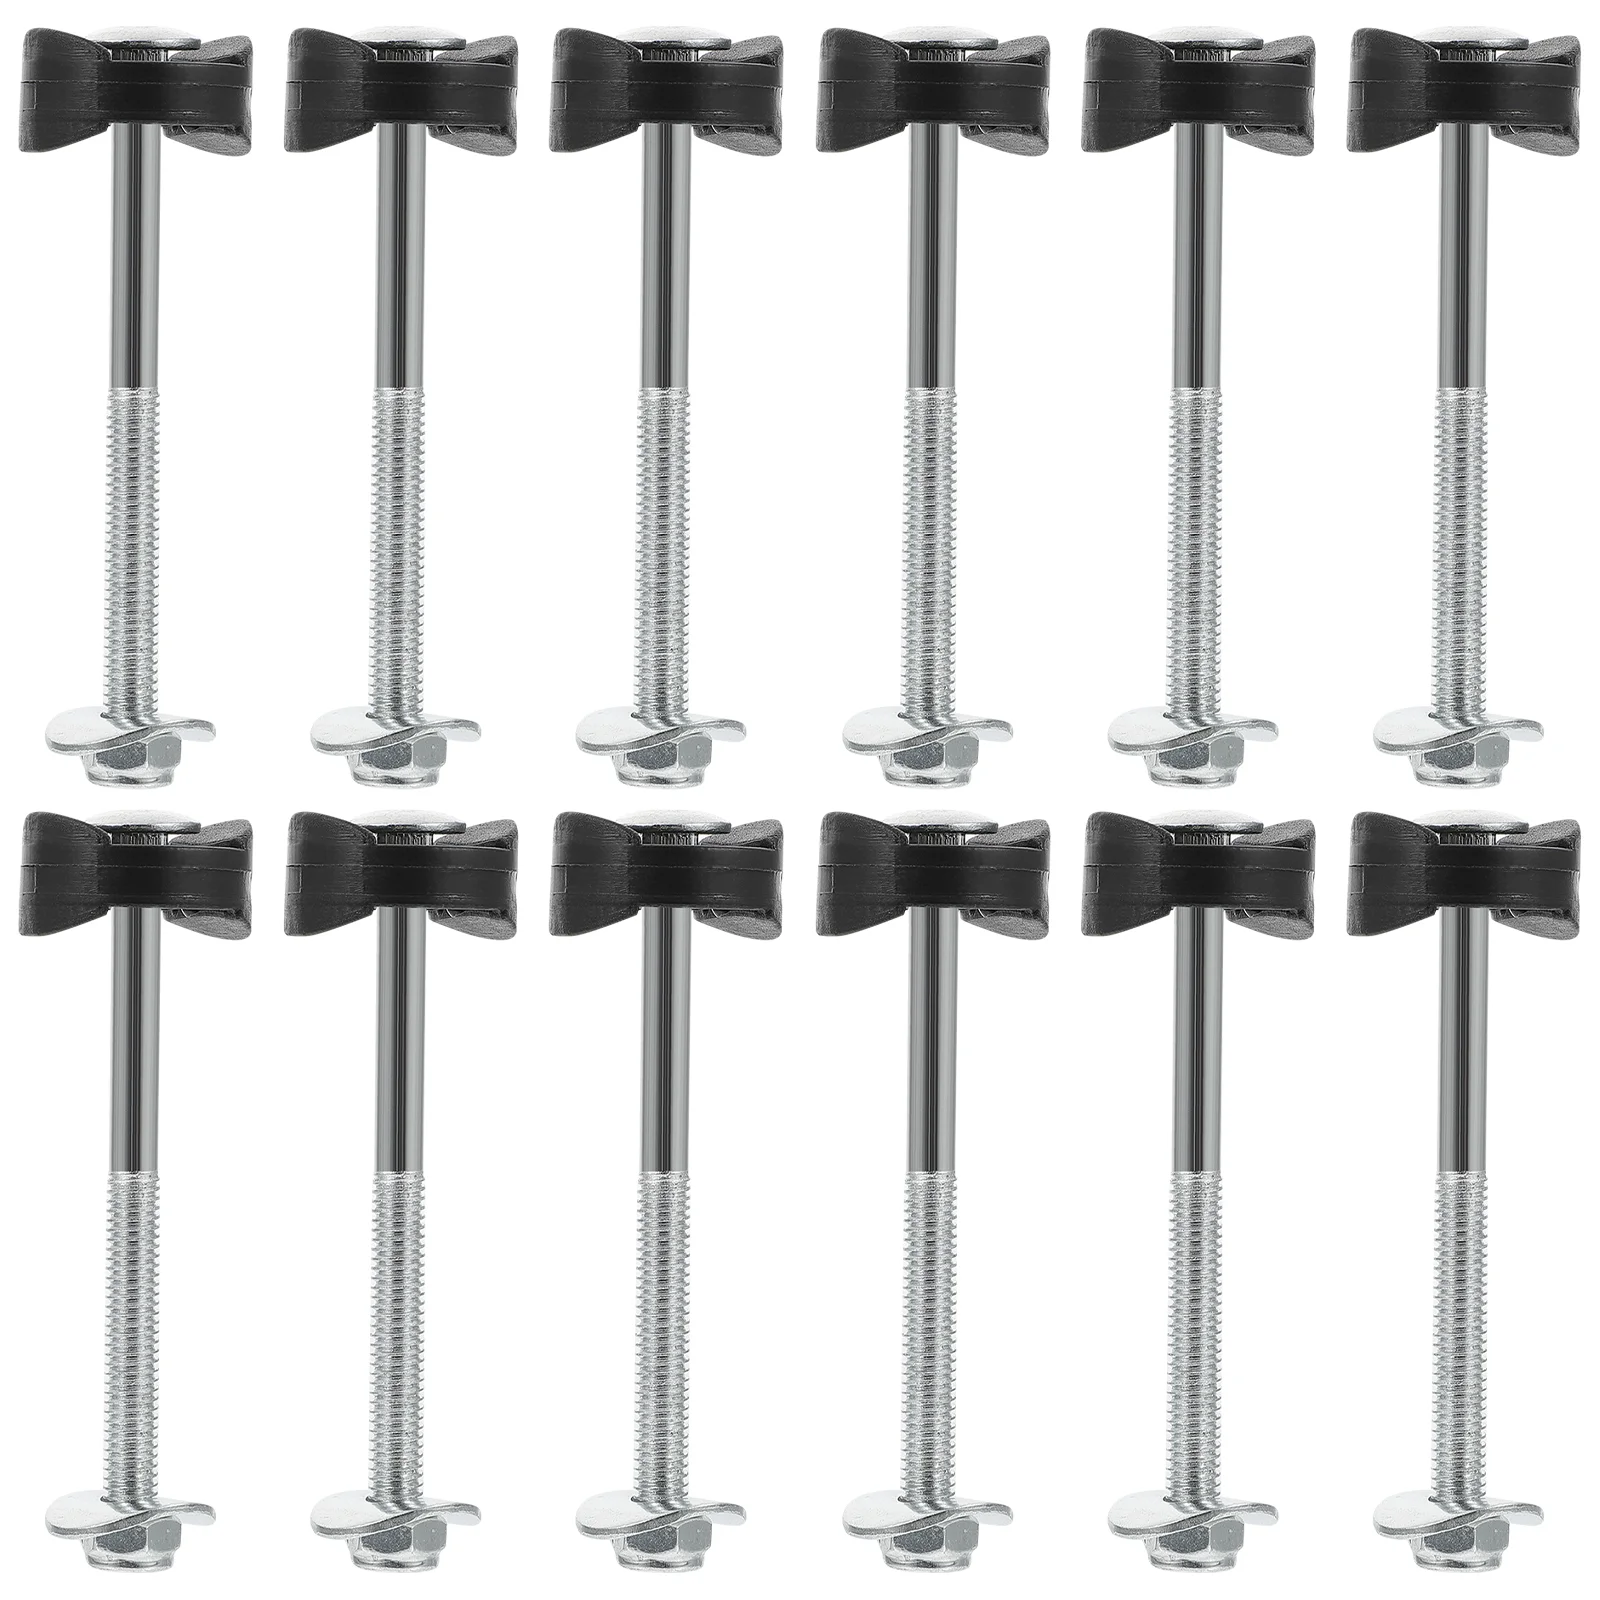 

12 Pcs Trampoline Screws Bolts Nuts Kids Stability Tool Tools Children Parts Pole Gap Spacers Jump